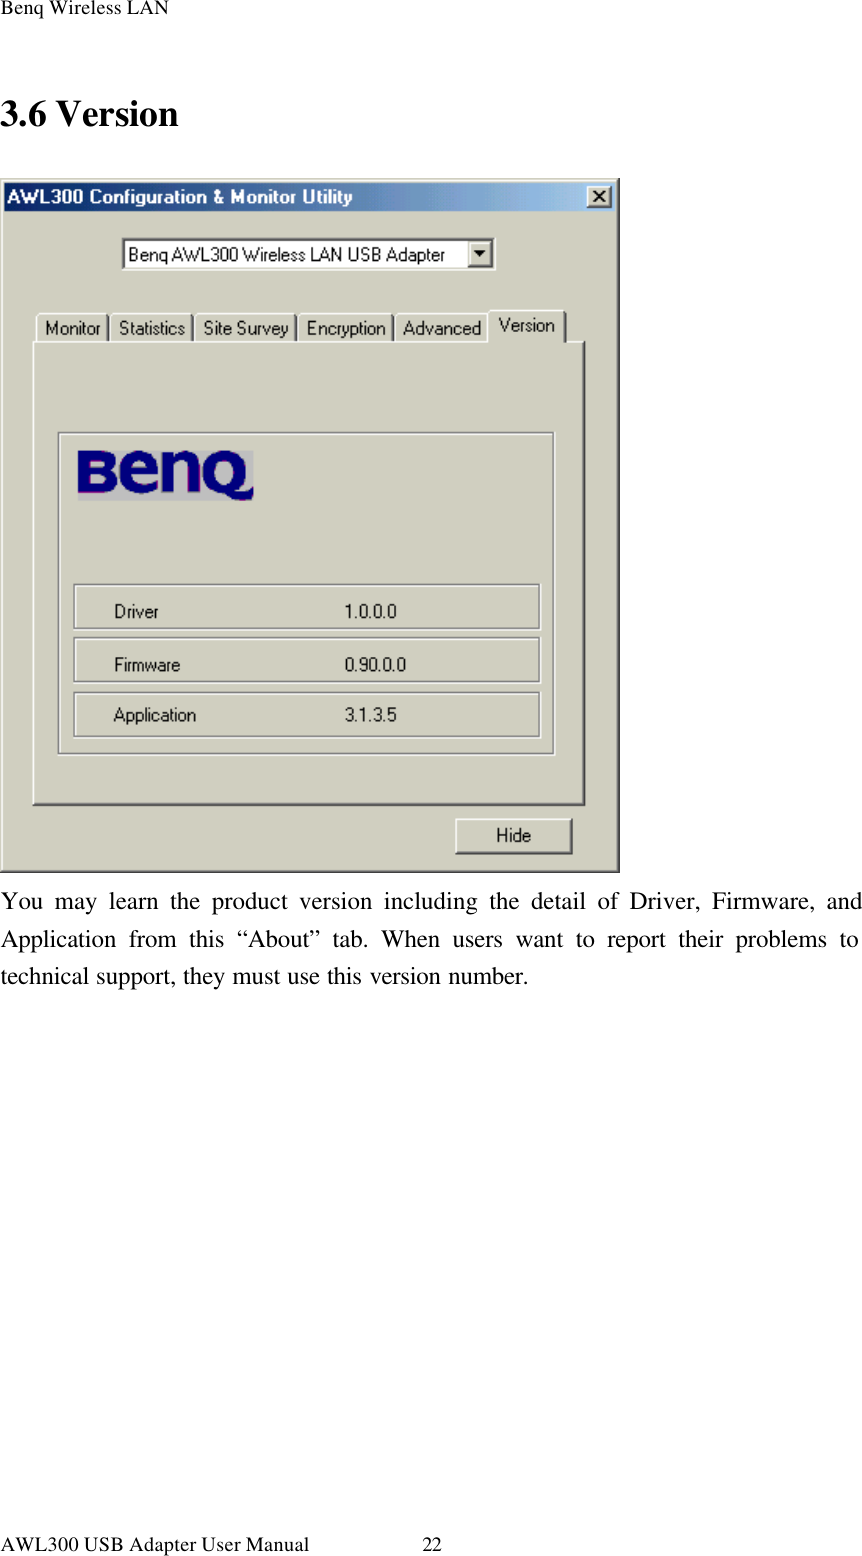 Benq Wireless LAN AWL300 USB Adapter User Manual 22 3.6 Version  You may learn the product version including the detail of Driver, Firmware, and Application from this “About” tab. When users want to report their problems to technical support, they must use this version number.  